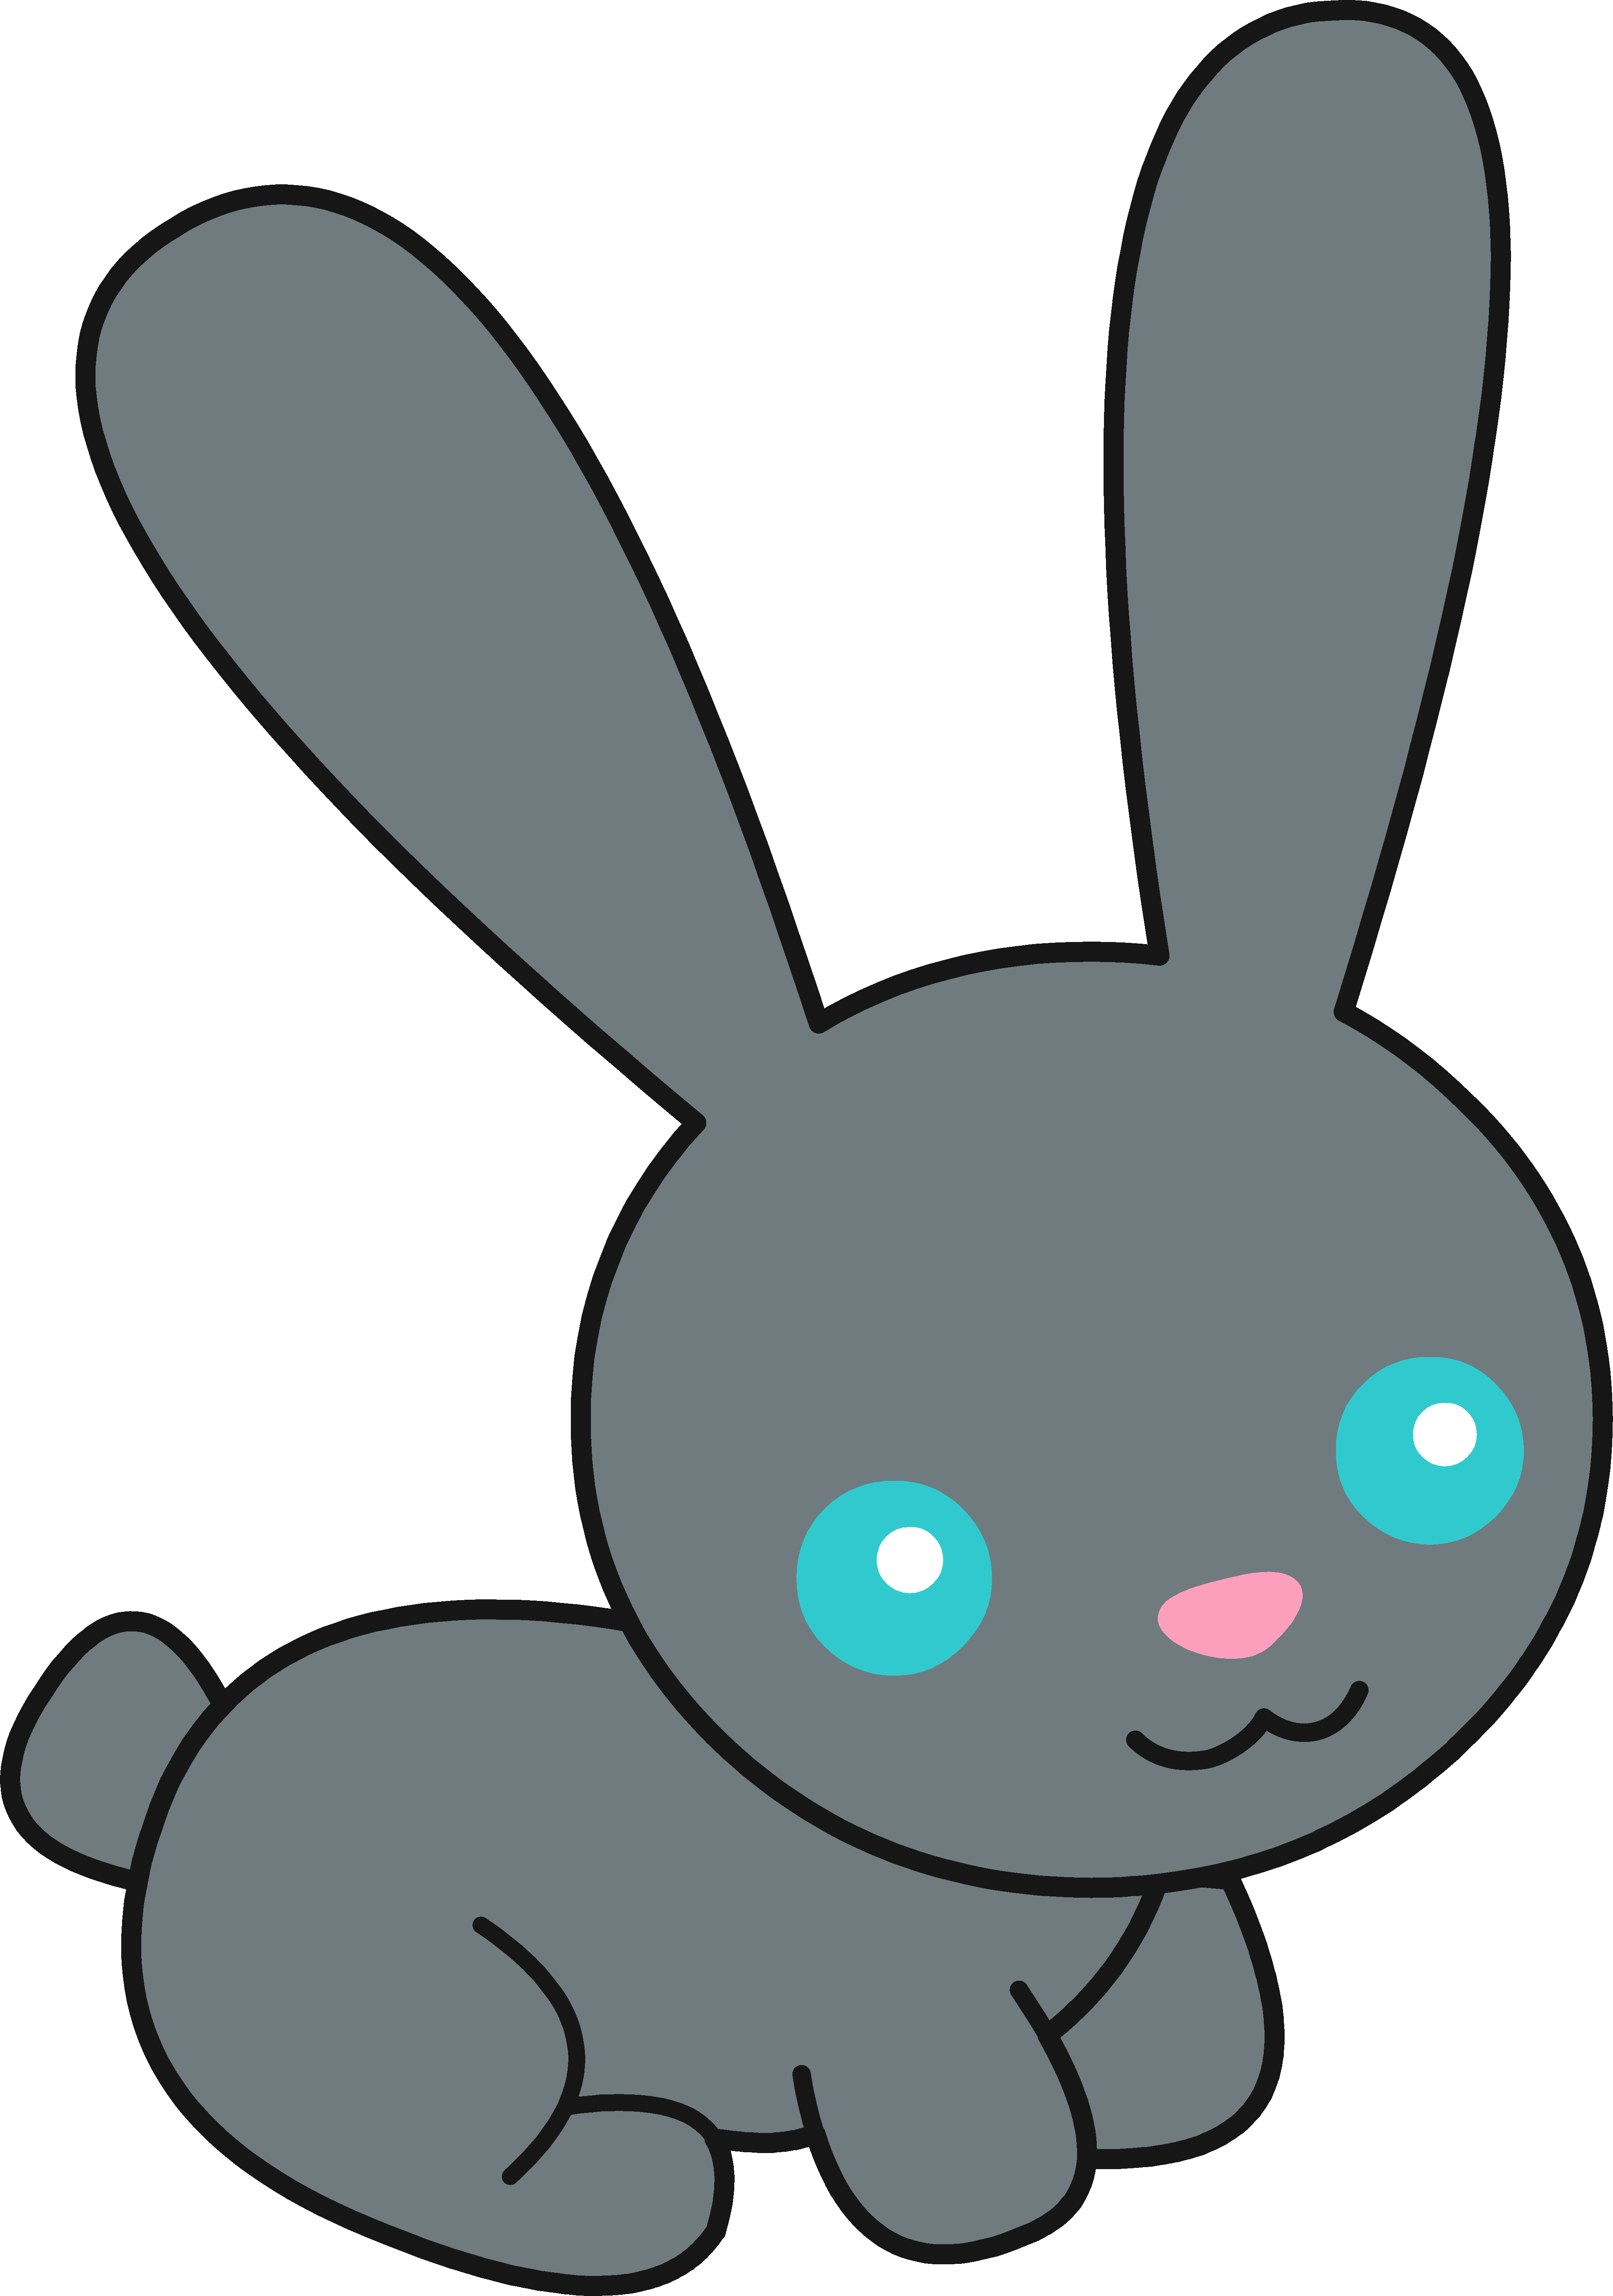 Cute Cartoon Bunny Pictures - ClipArt Best